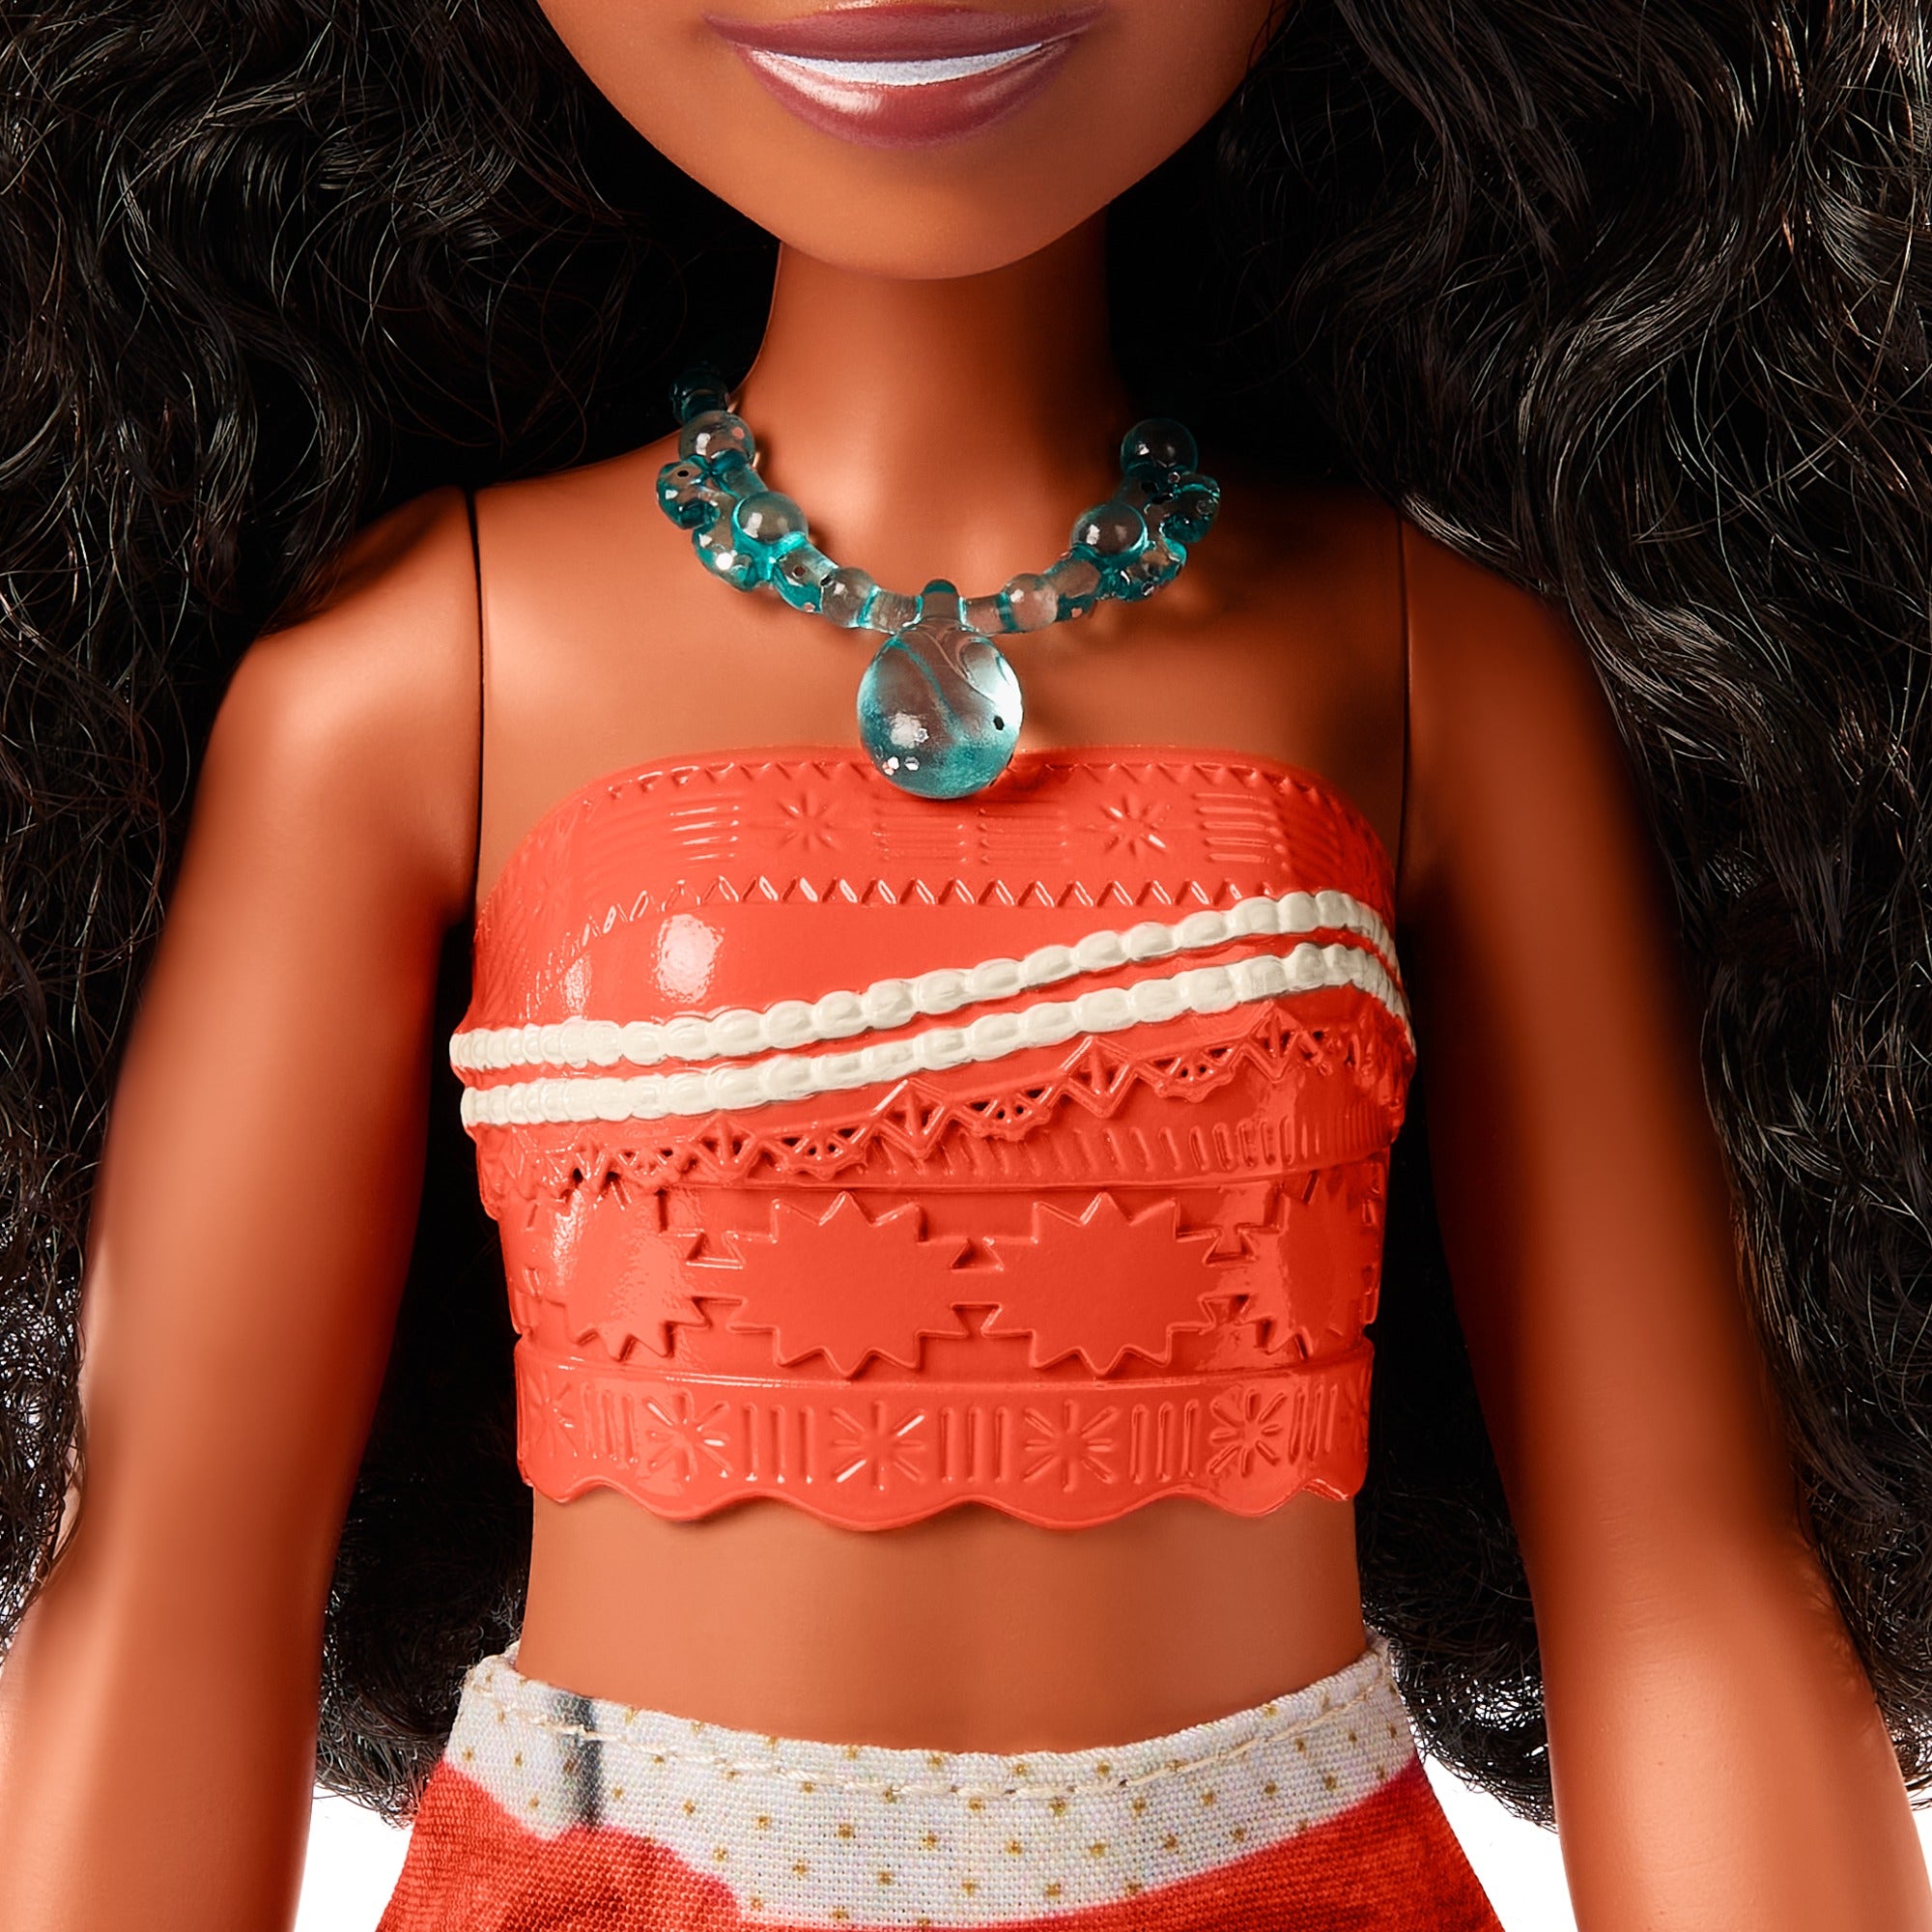 Disney Princess Posable Moana Fashion Doll with Clothing and Accessories Inspired by the Disney Movie for Kids Ages 3+